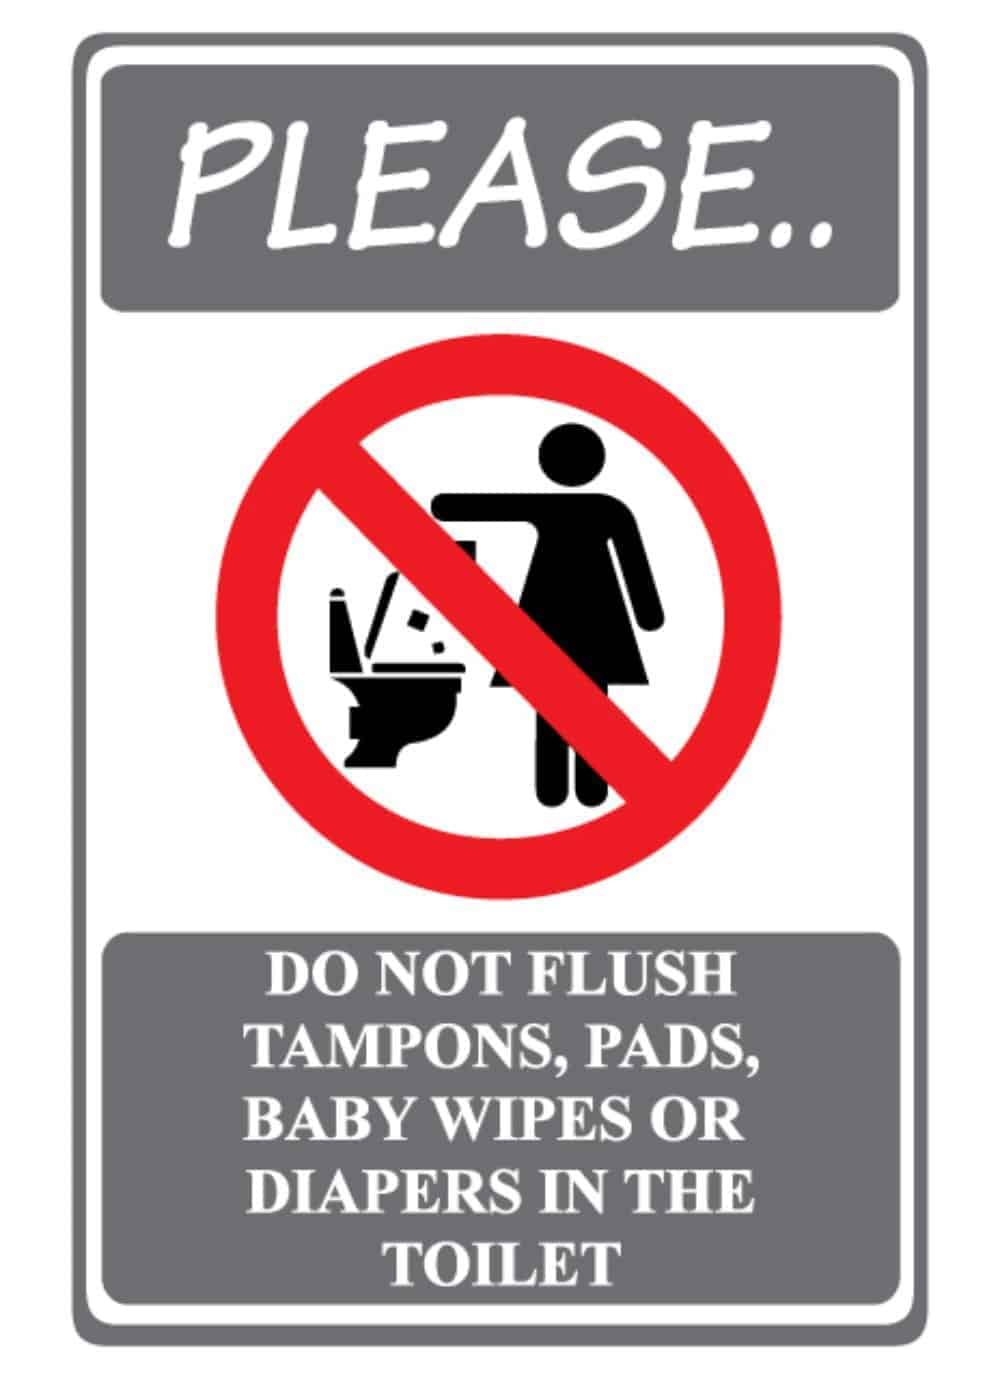 Are Wet Wipes Disposable and Flushable?